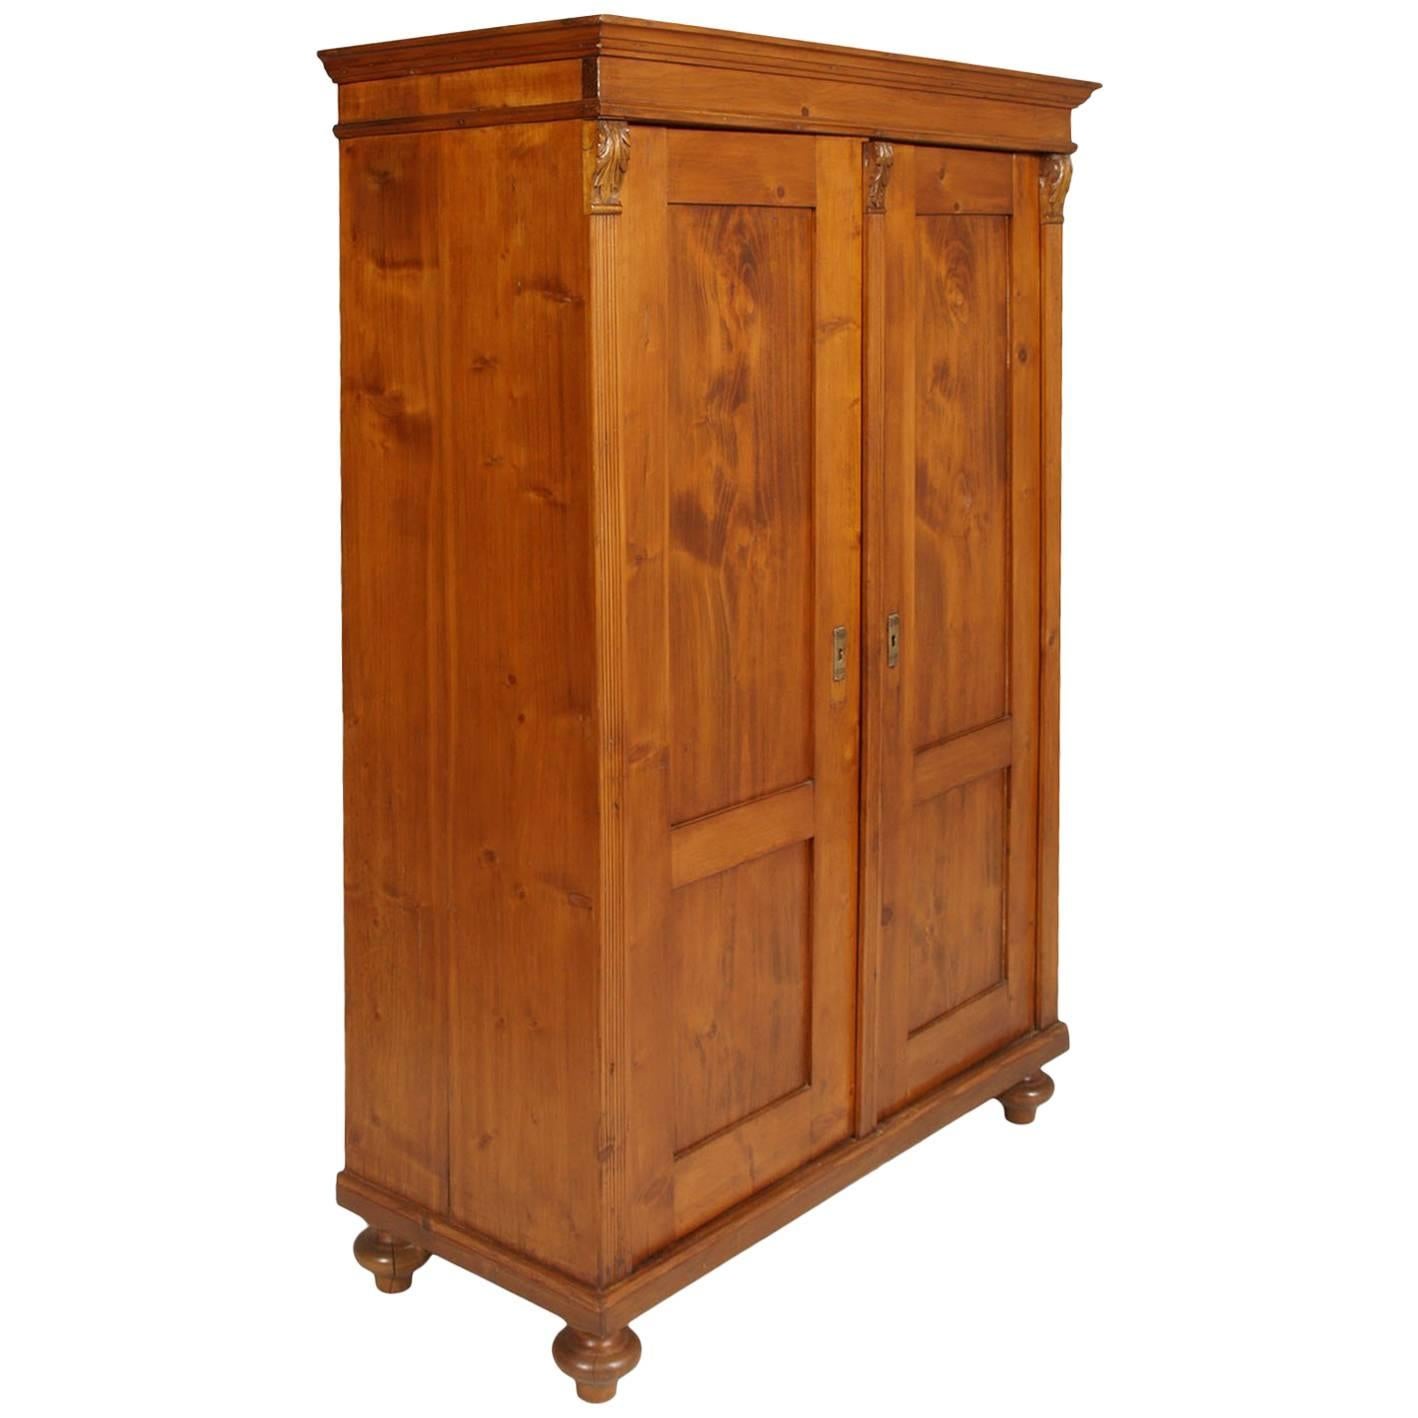 19th Century rustic Tyrolean Armoire in Solid Wood Restored and Wax Polished